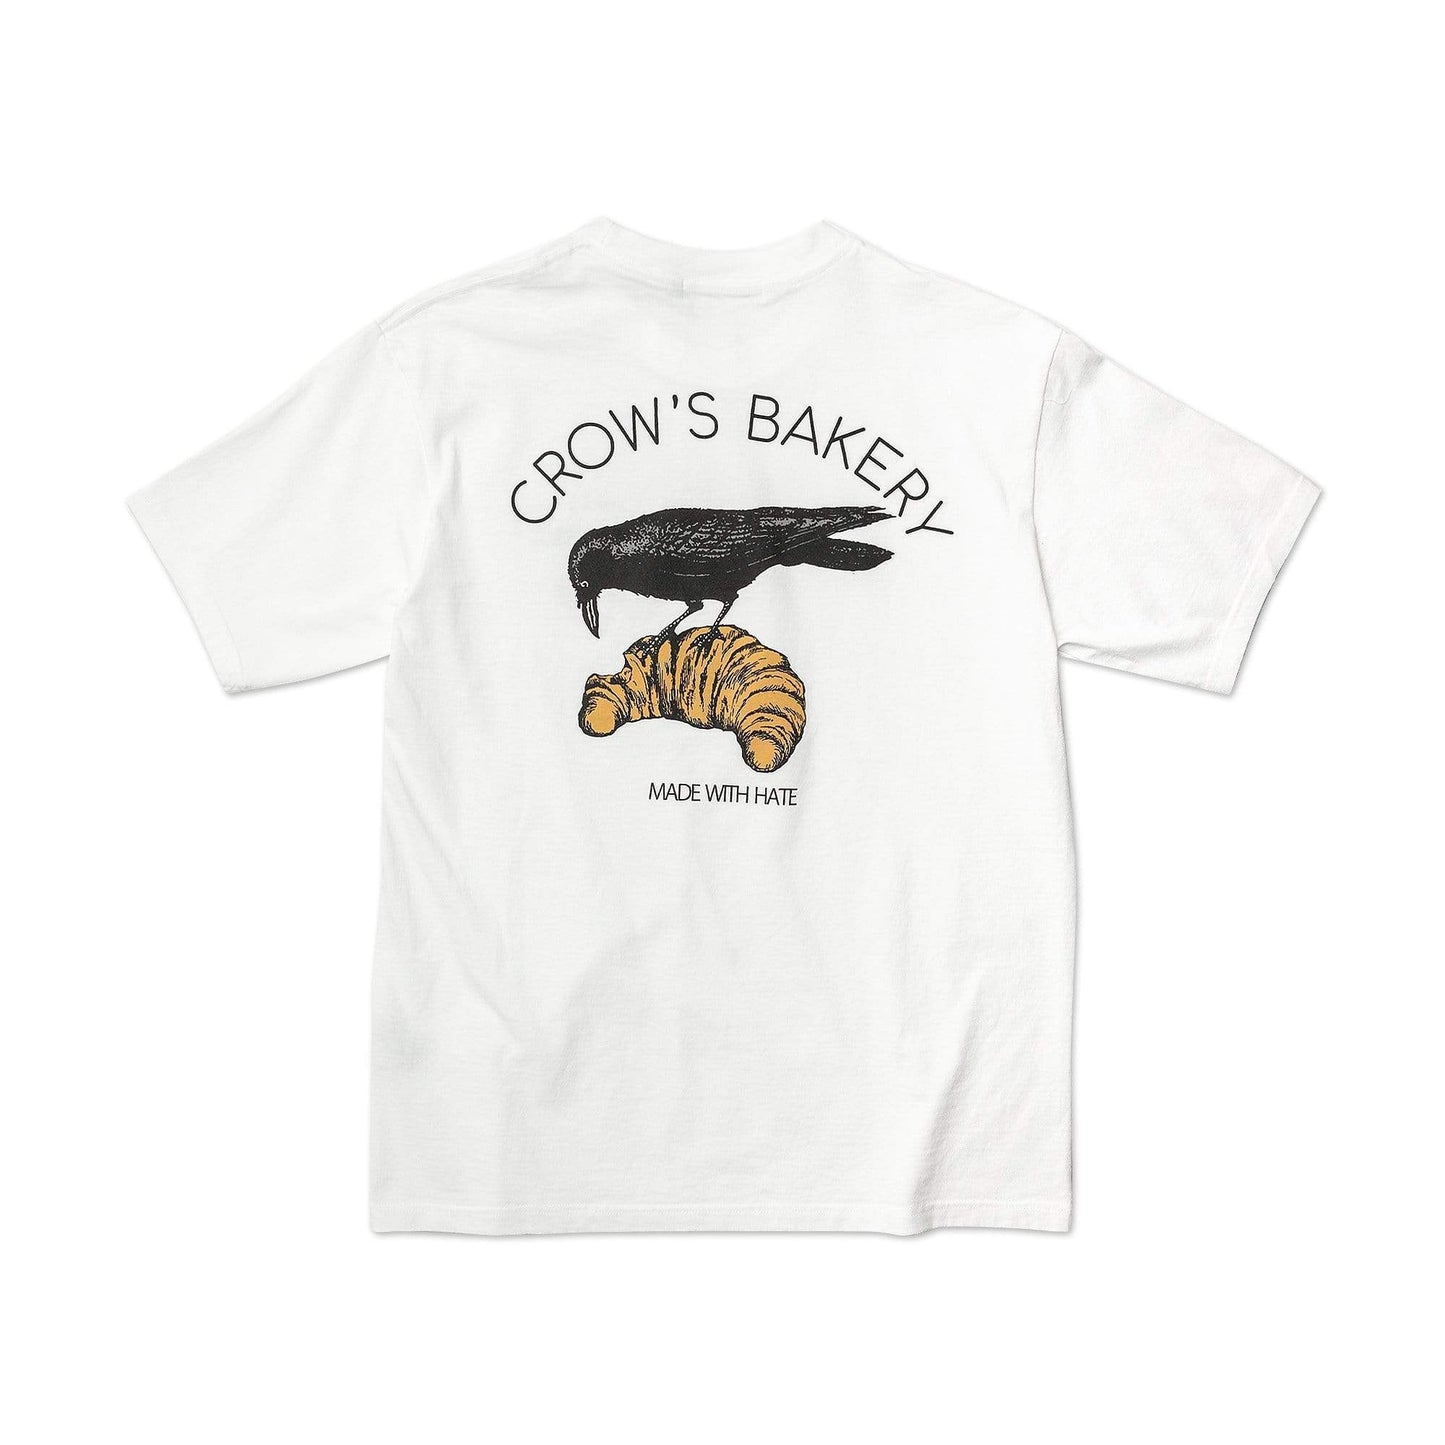 undercover undercover crow's bakery t-shirt (white)